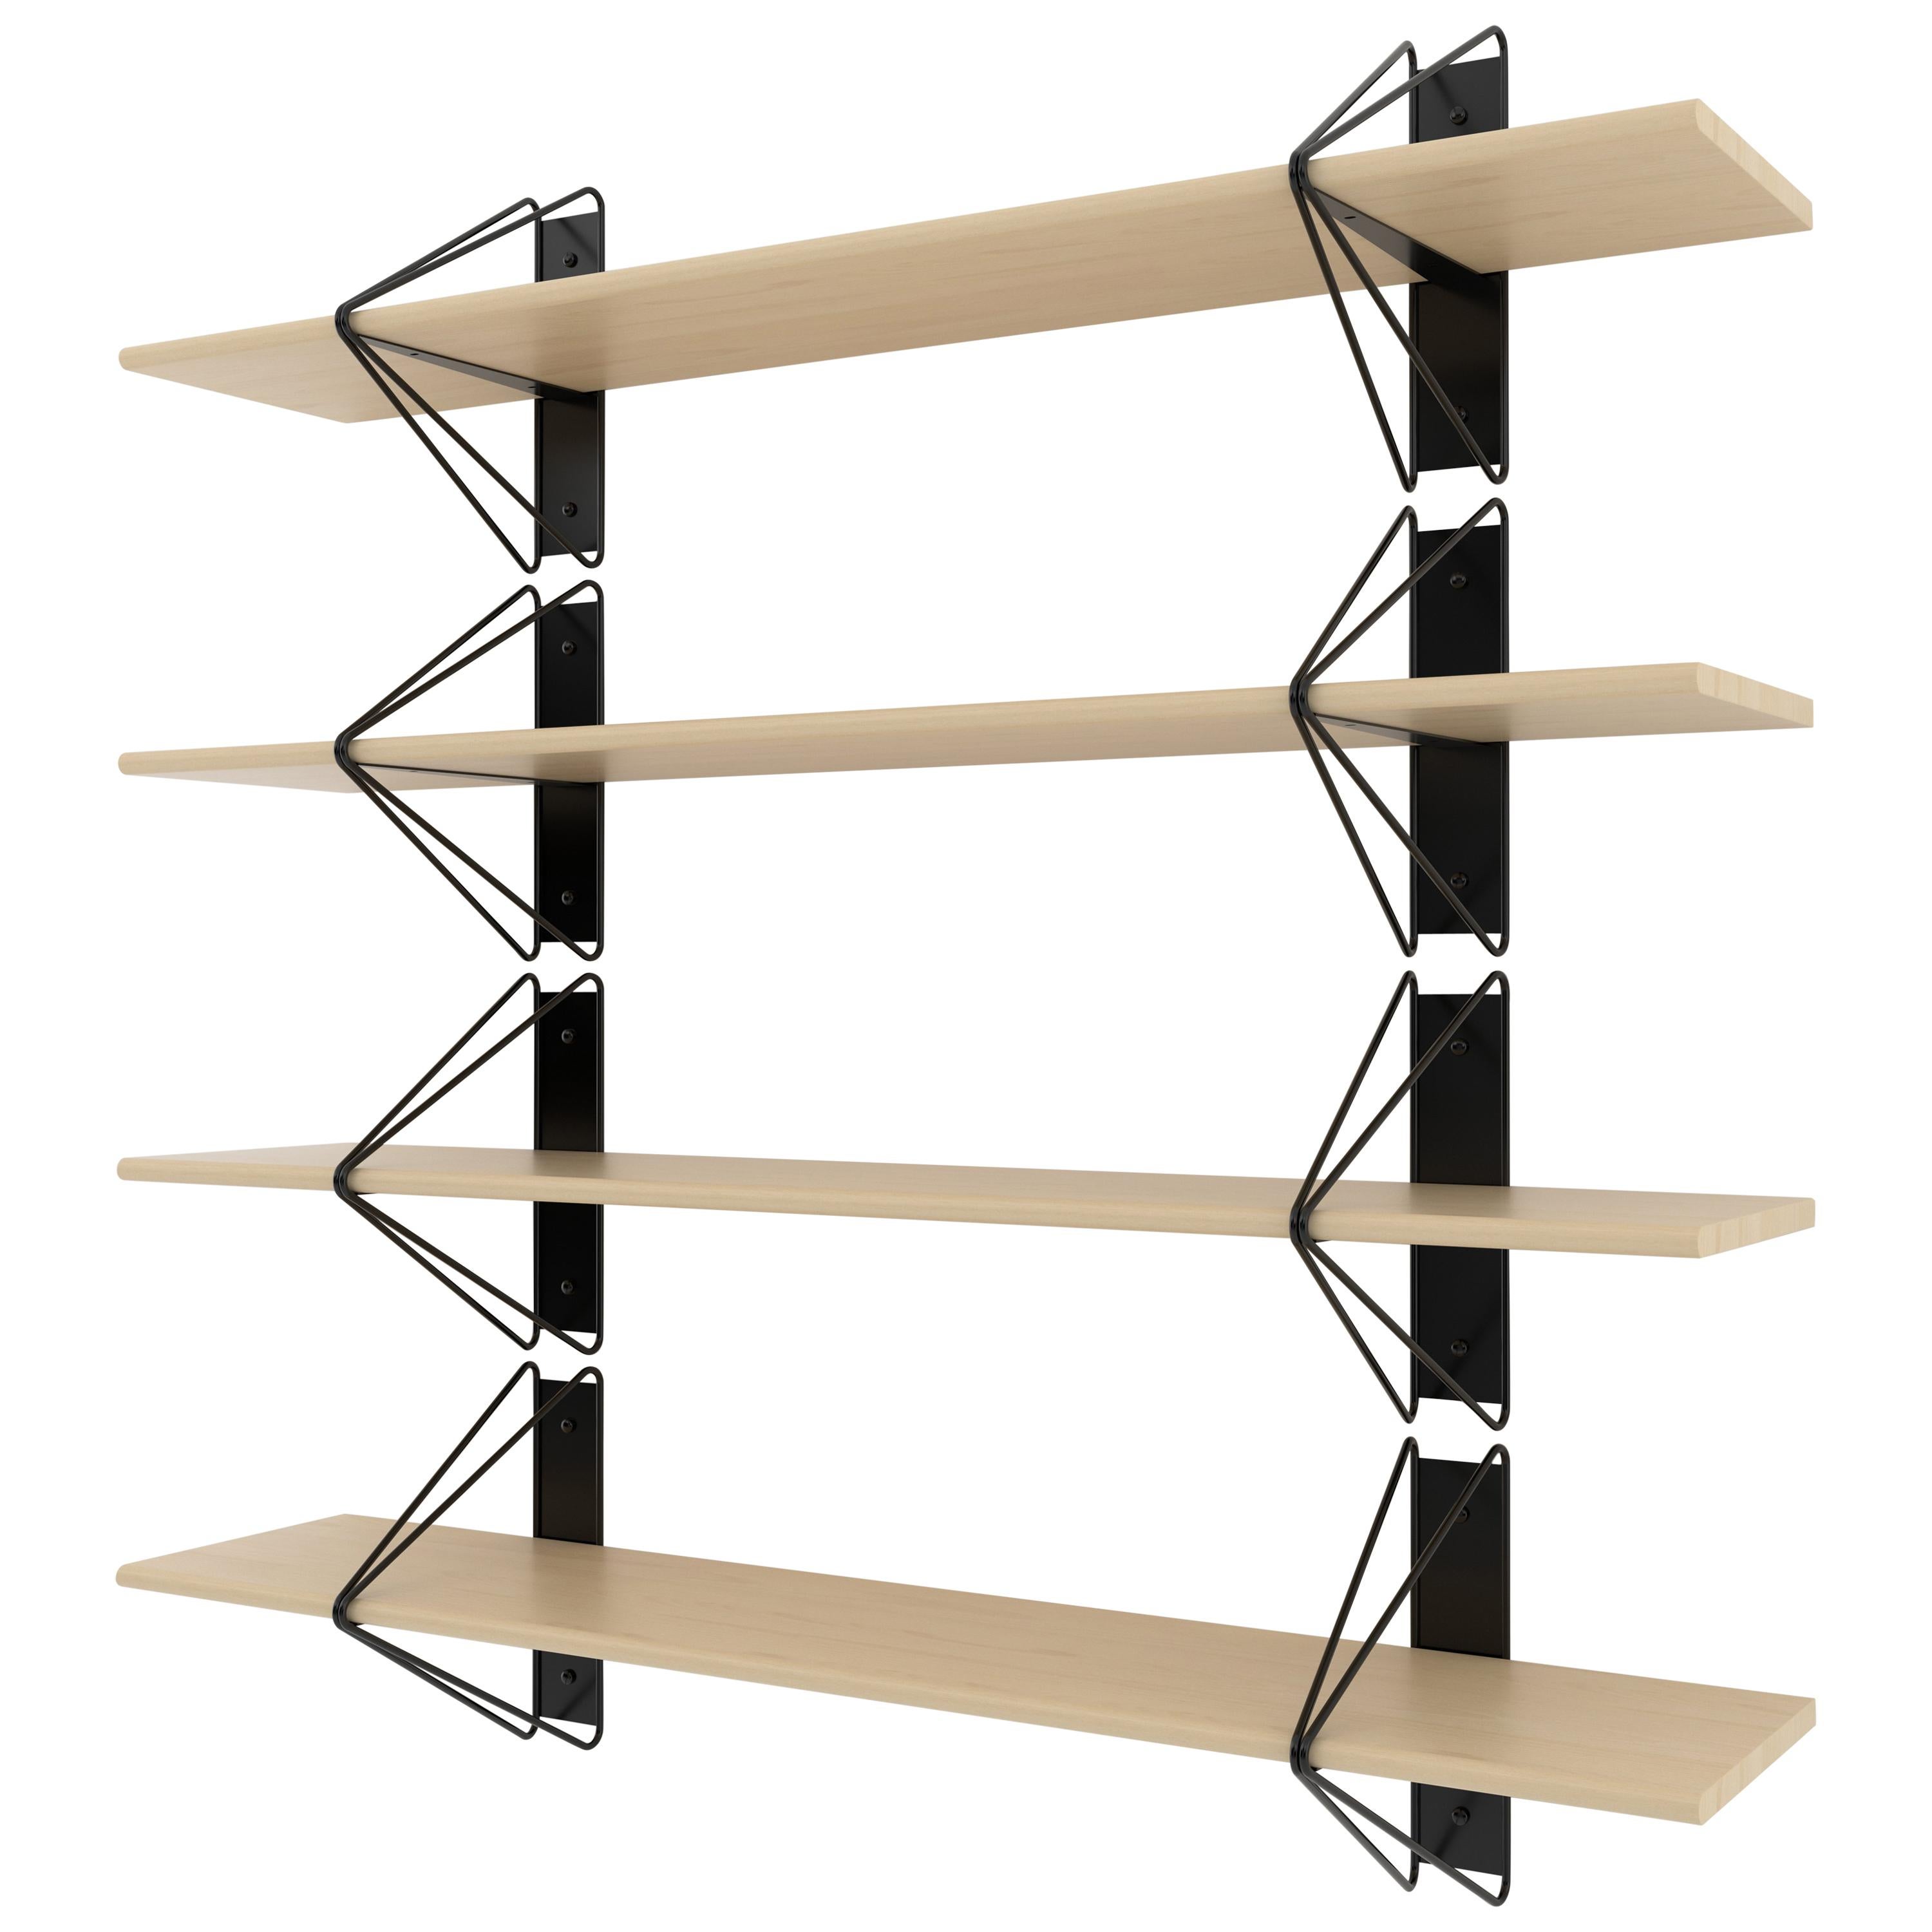 American Set of 3 Strut Shelves from Souda, White and Maple, Made to Order For Sale